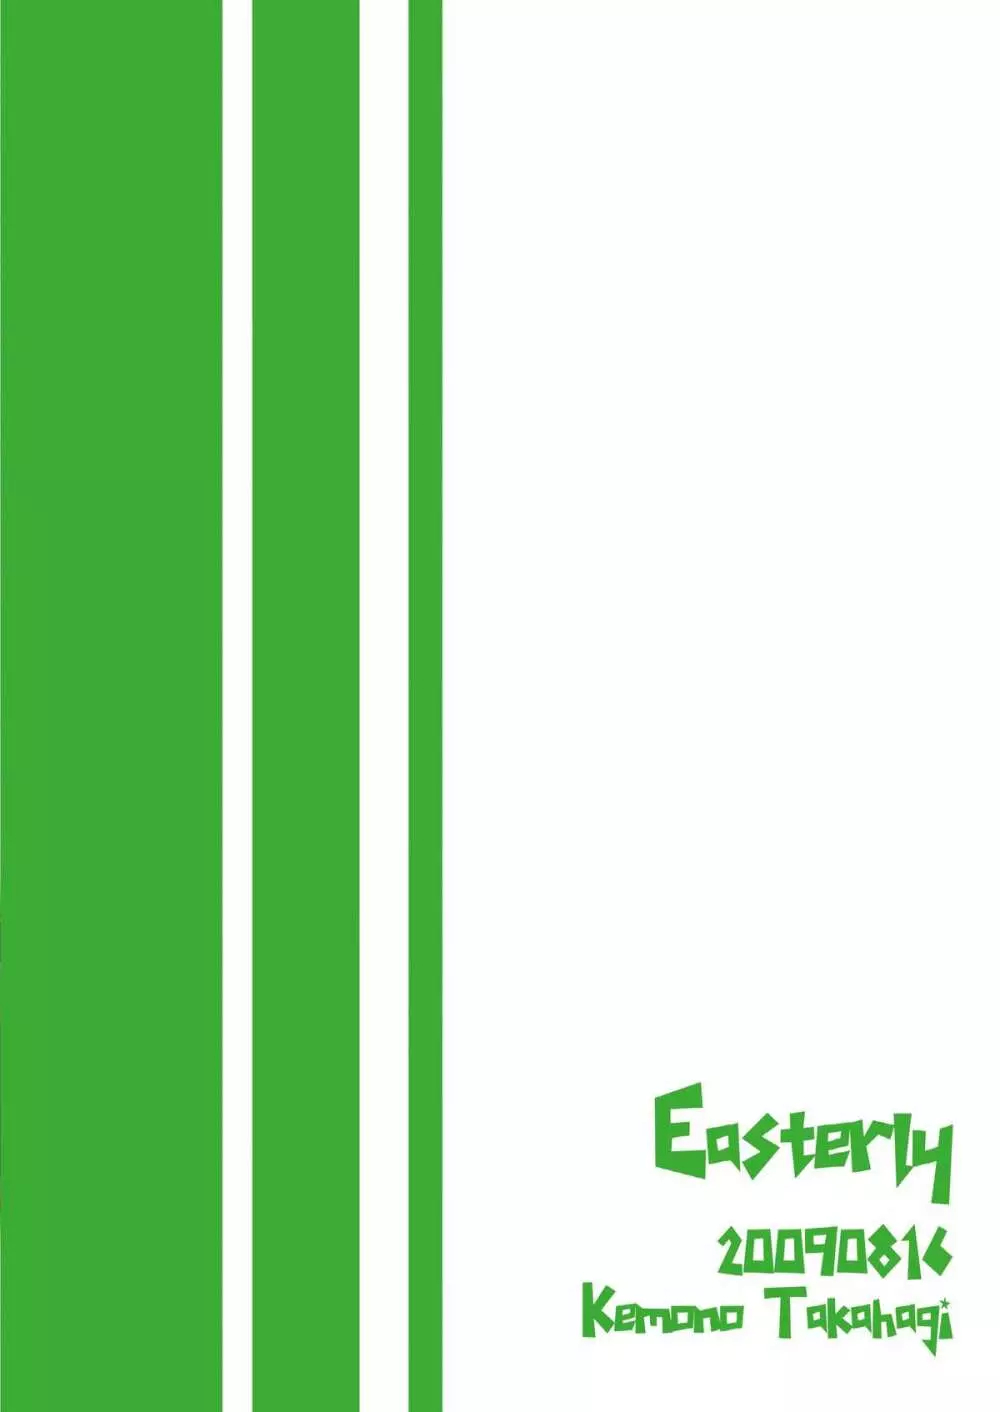 Easterly 24ページ